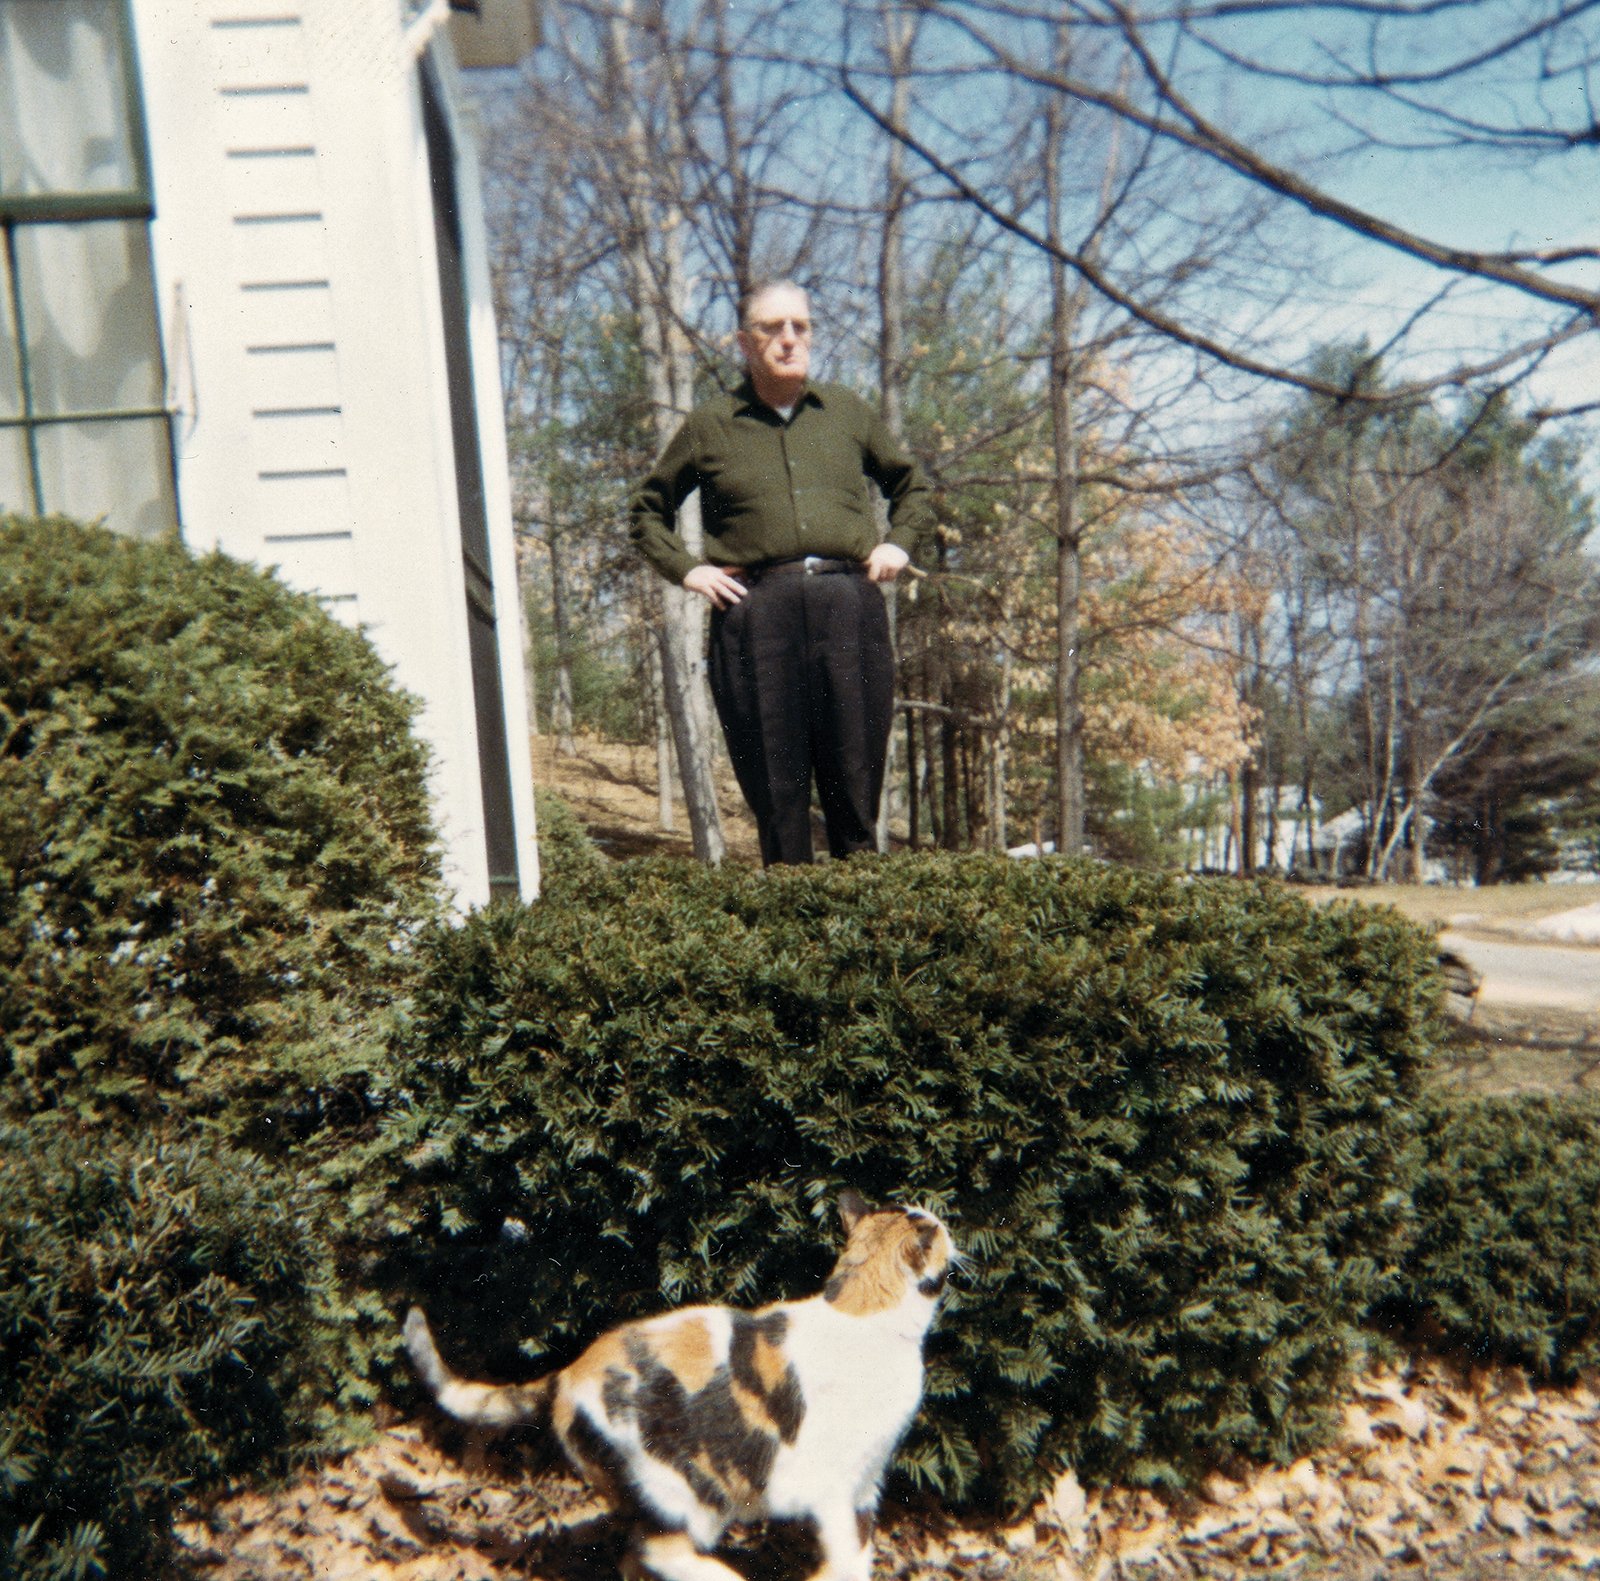 John F. Kennedy out on the front porch of his family home with Spotty, an adopted stray in the foreground. Sturbridge, late 1960s.